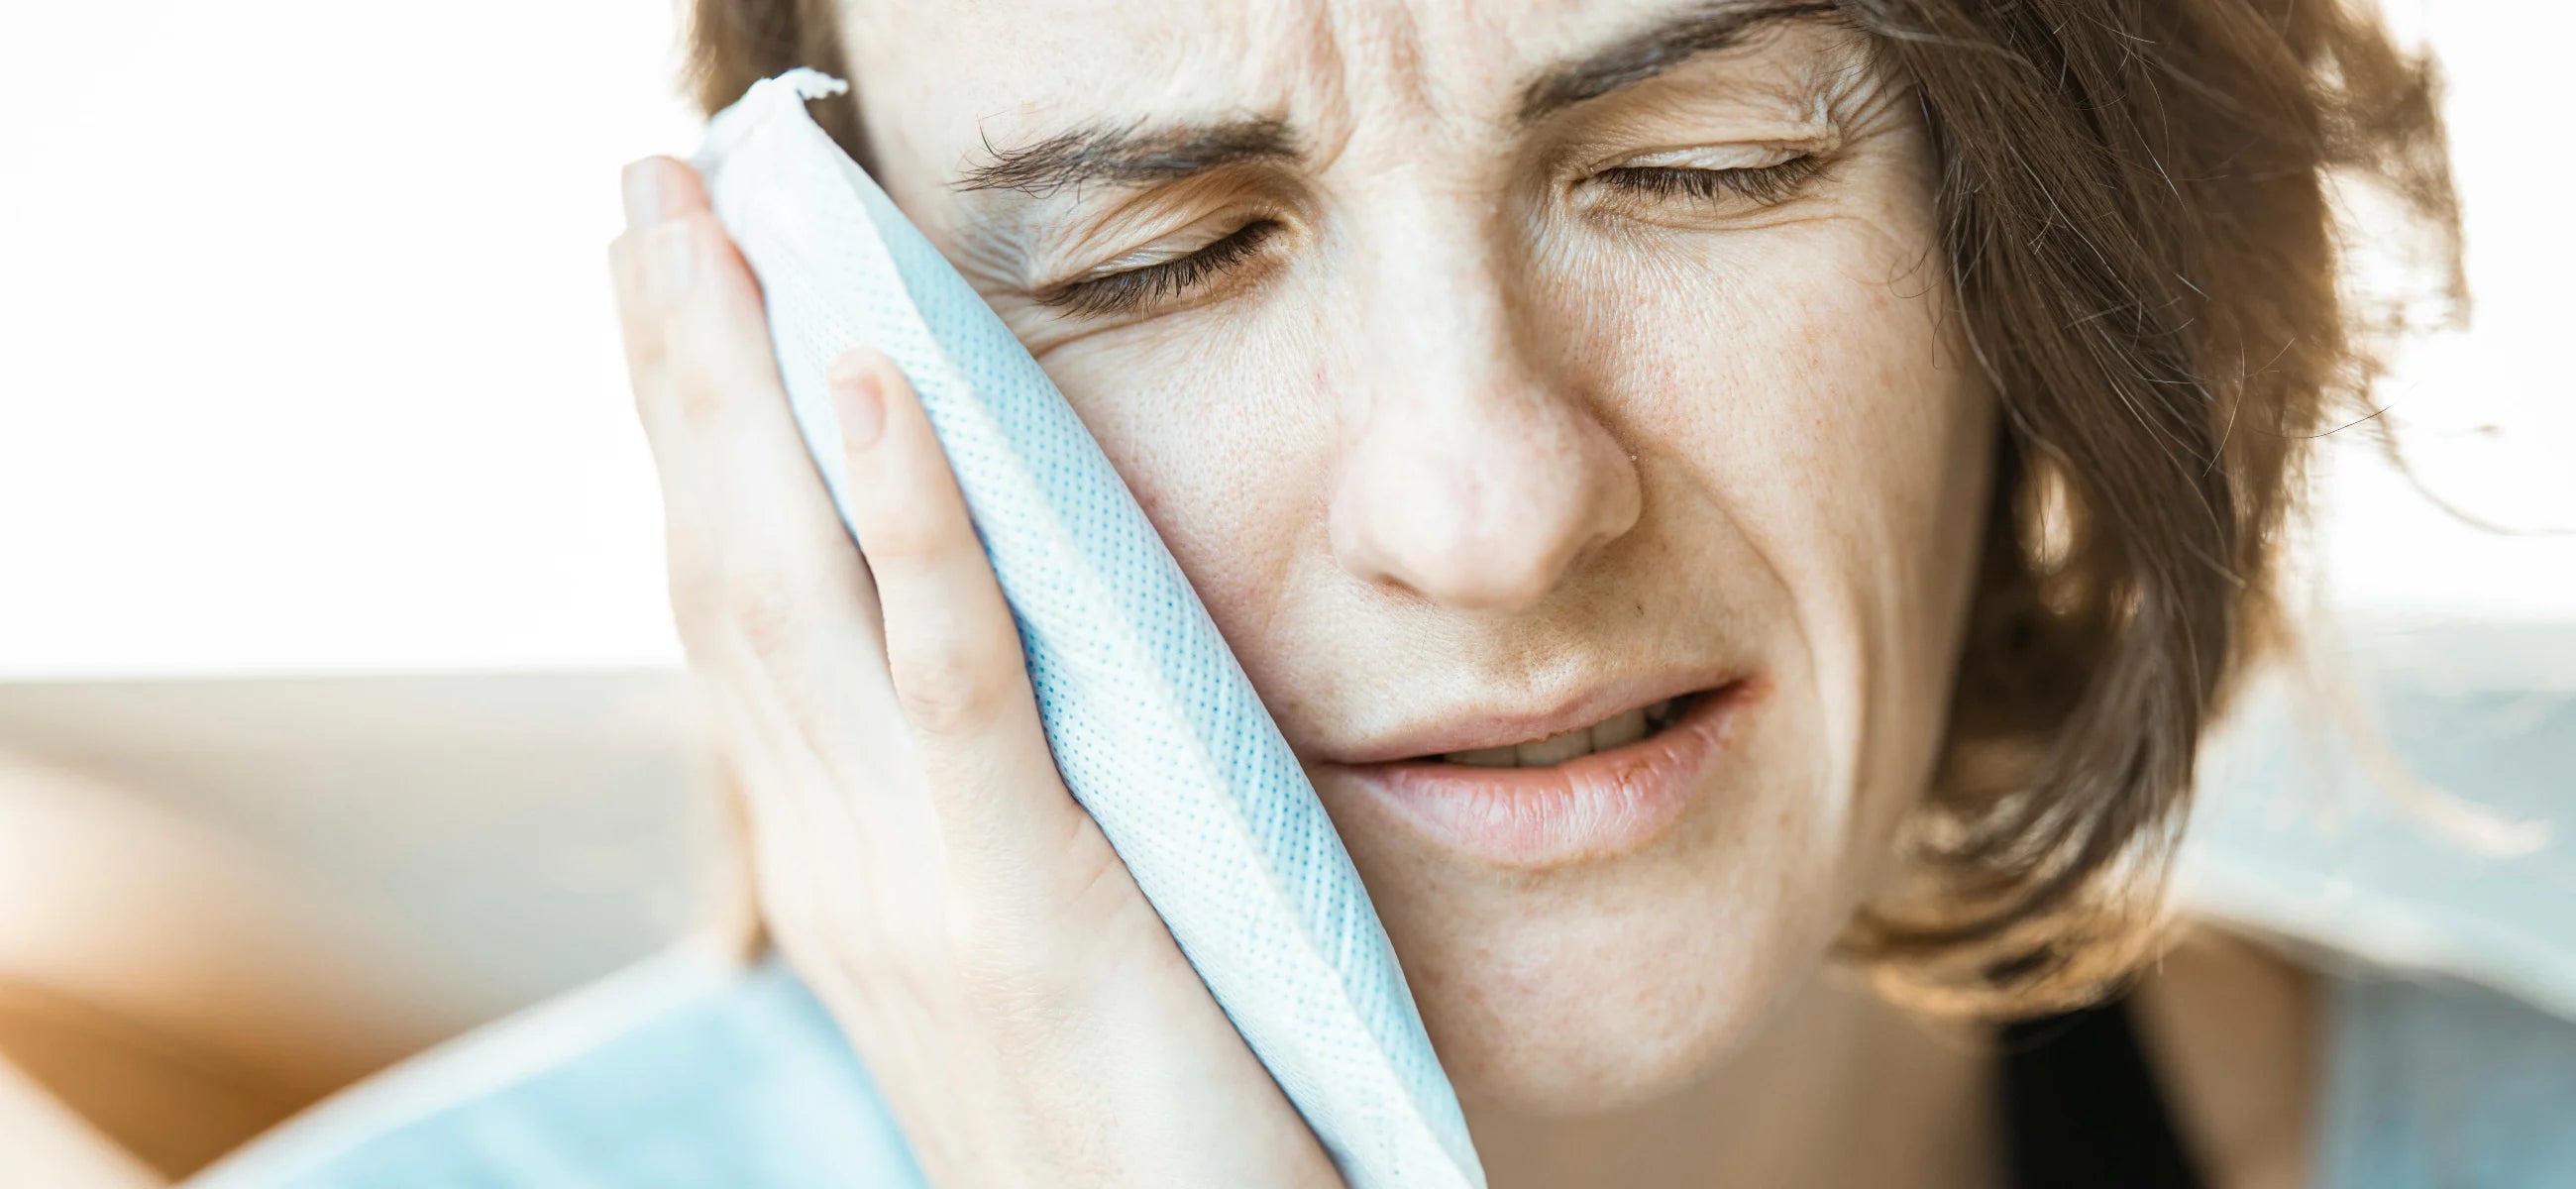 Experiencing jaw pain? Causes, pain relief, and FAQs